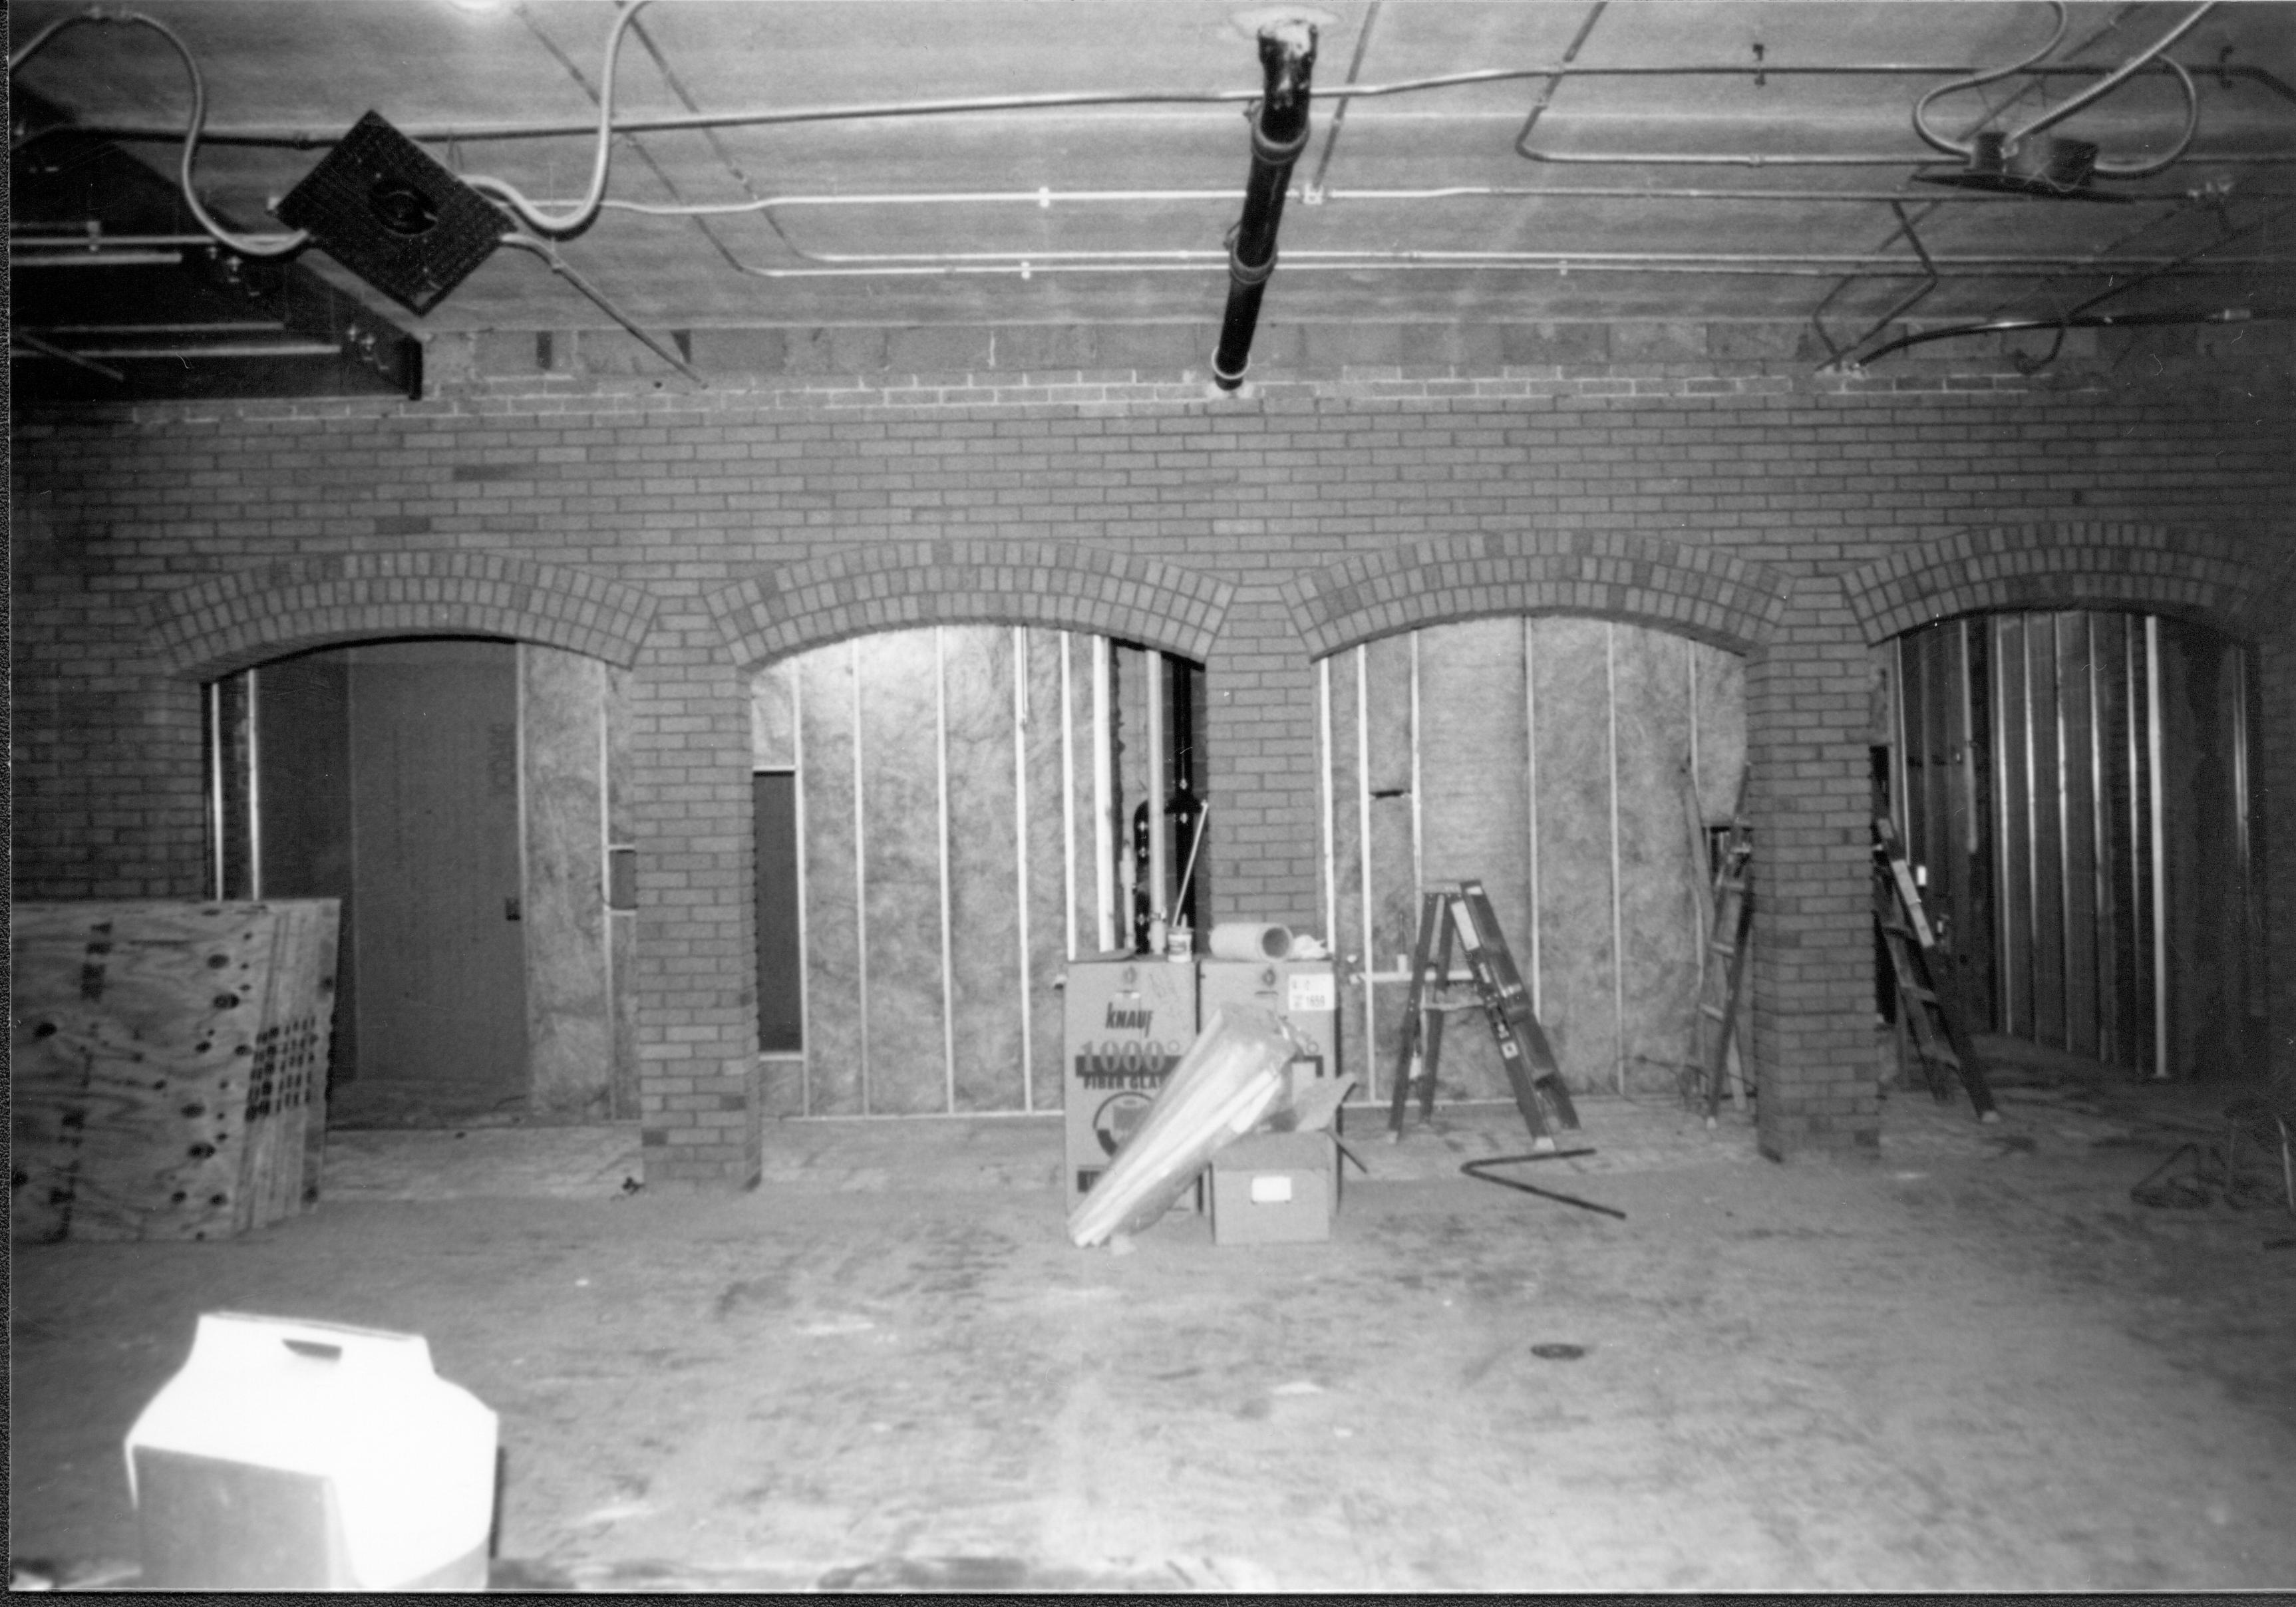 Visitor Center - remodeling, restroom entrance arches area off main area. Looking Northwest from main area. Visitor Center, arches, remodeling, restrooms, main